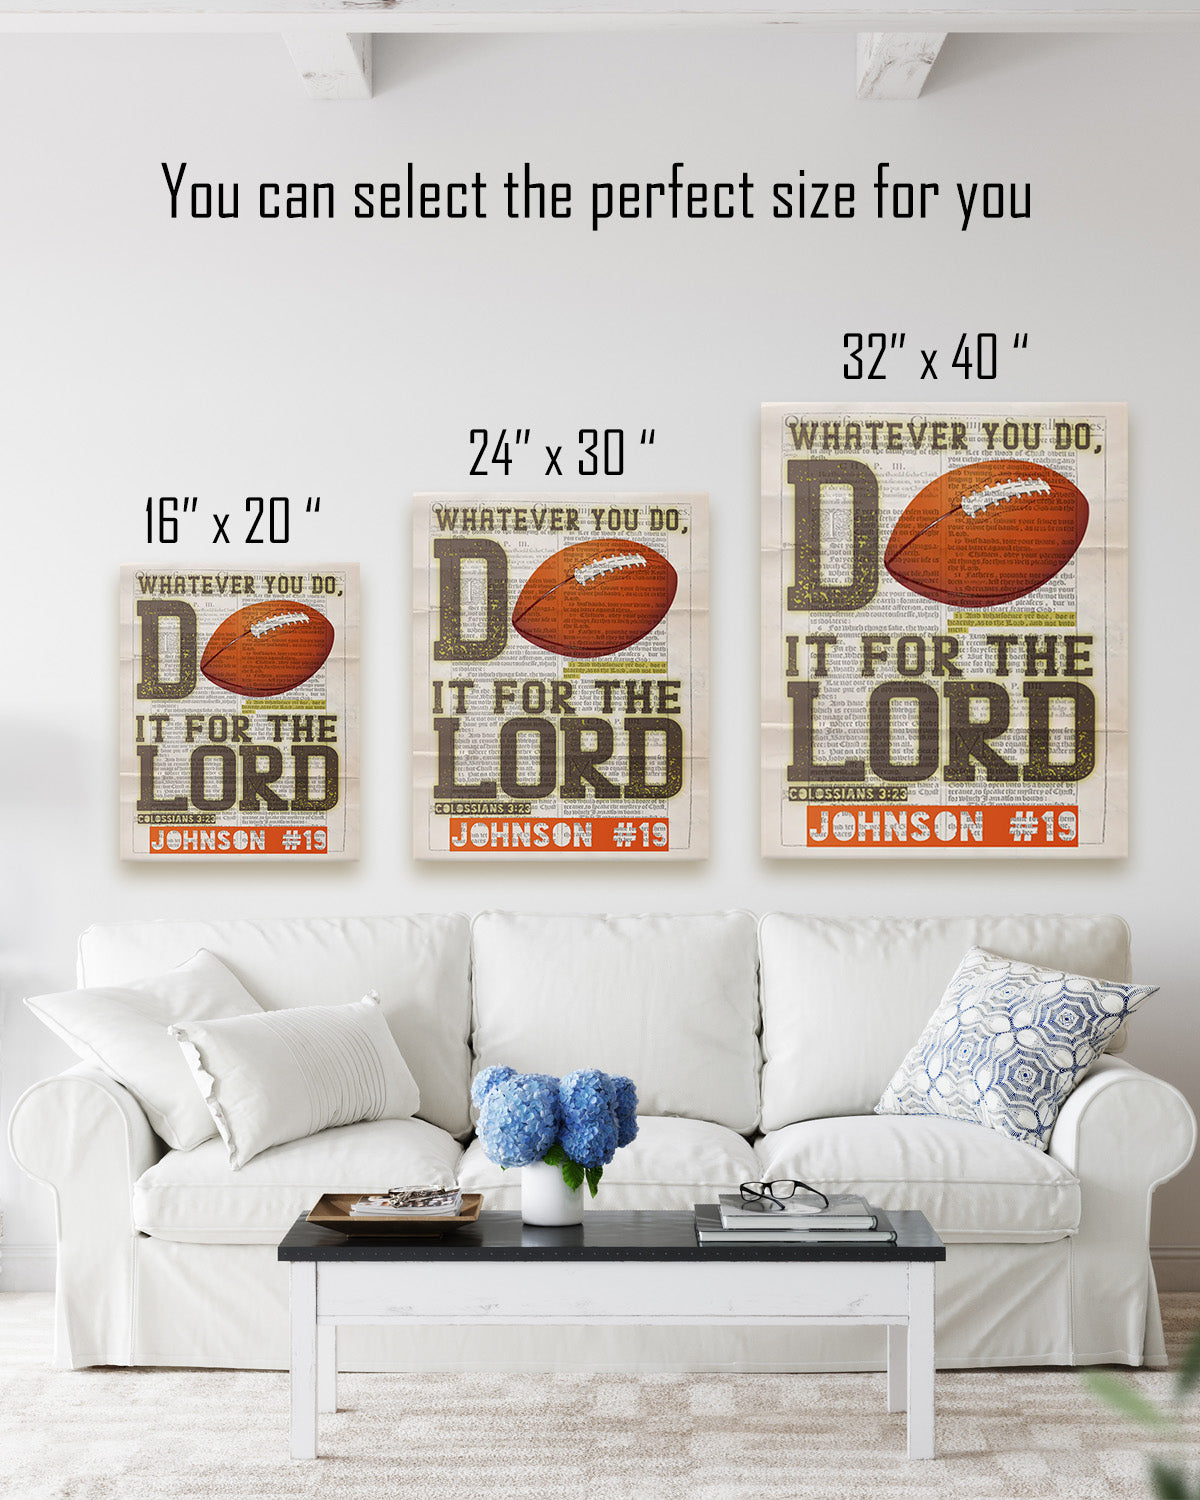 Do It For The Lord - Customizable with Last Name & Jersey Number - Religious Motivational Football Wall Art - Inspirational Football Quotes